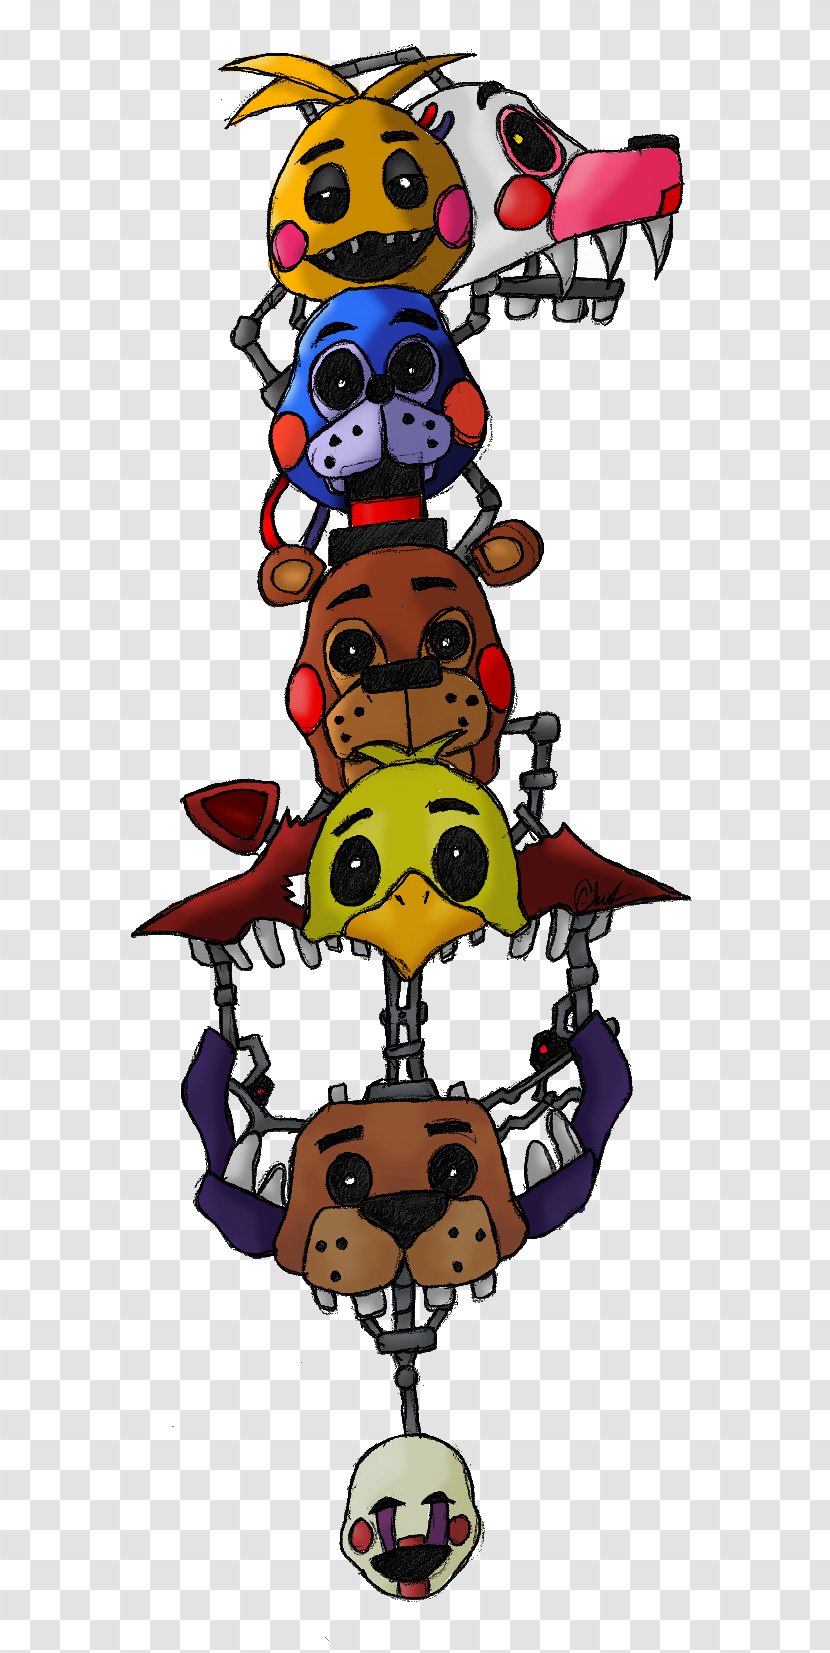 Clip Art Illustration Product Fiction Character - Five Nights At Freddy's Poster Transparent PNG